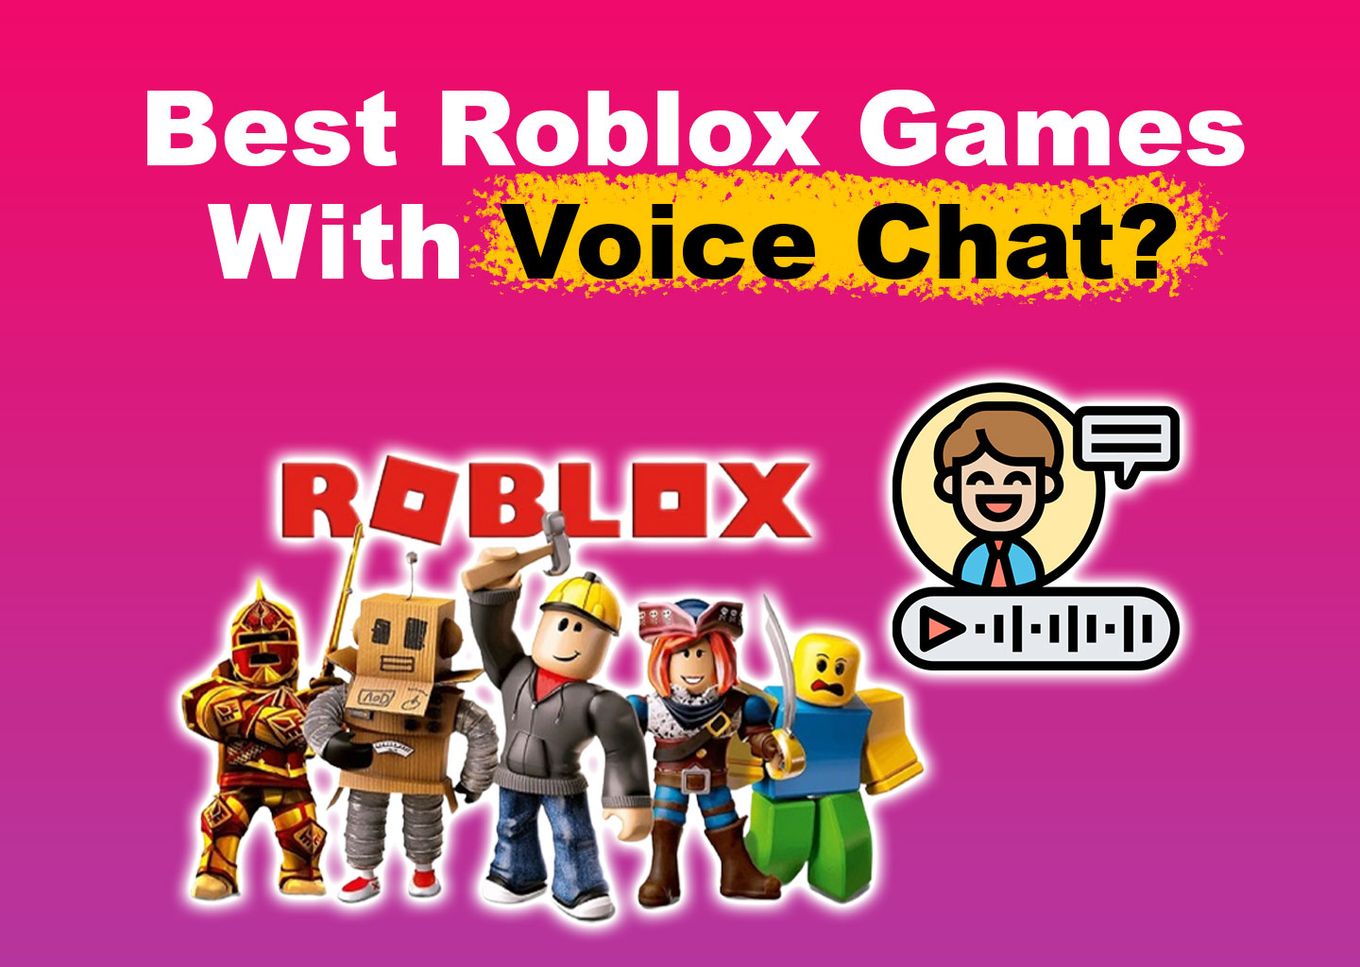 Voice chat on Ps5 : r/roblox